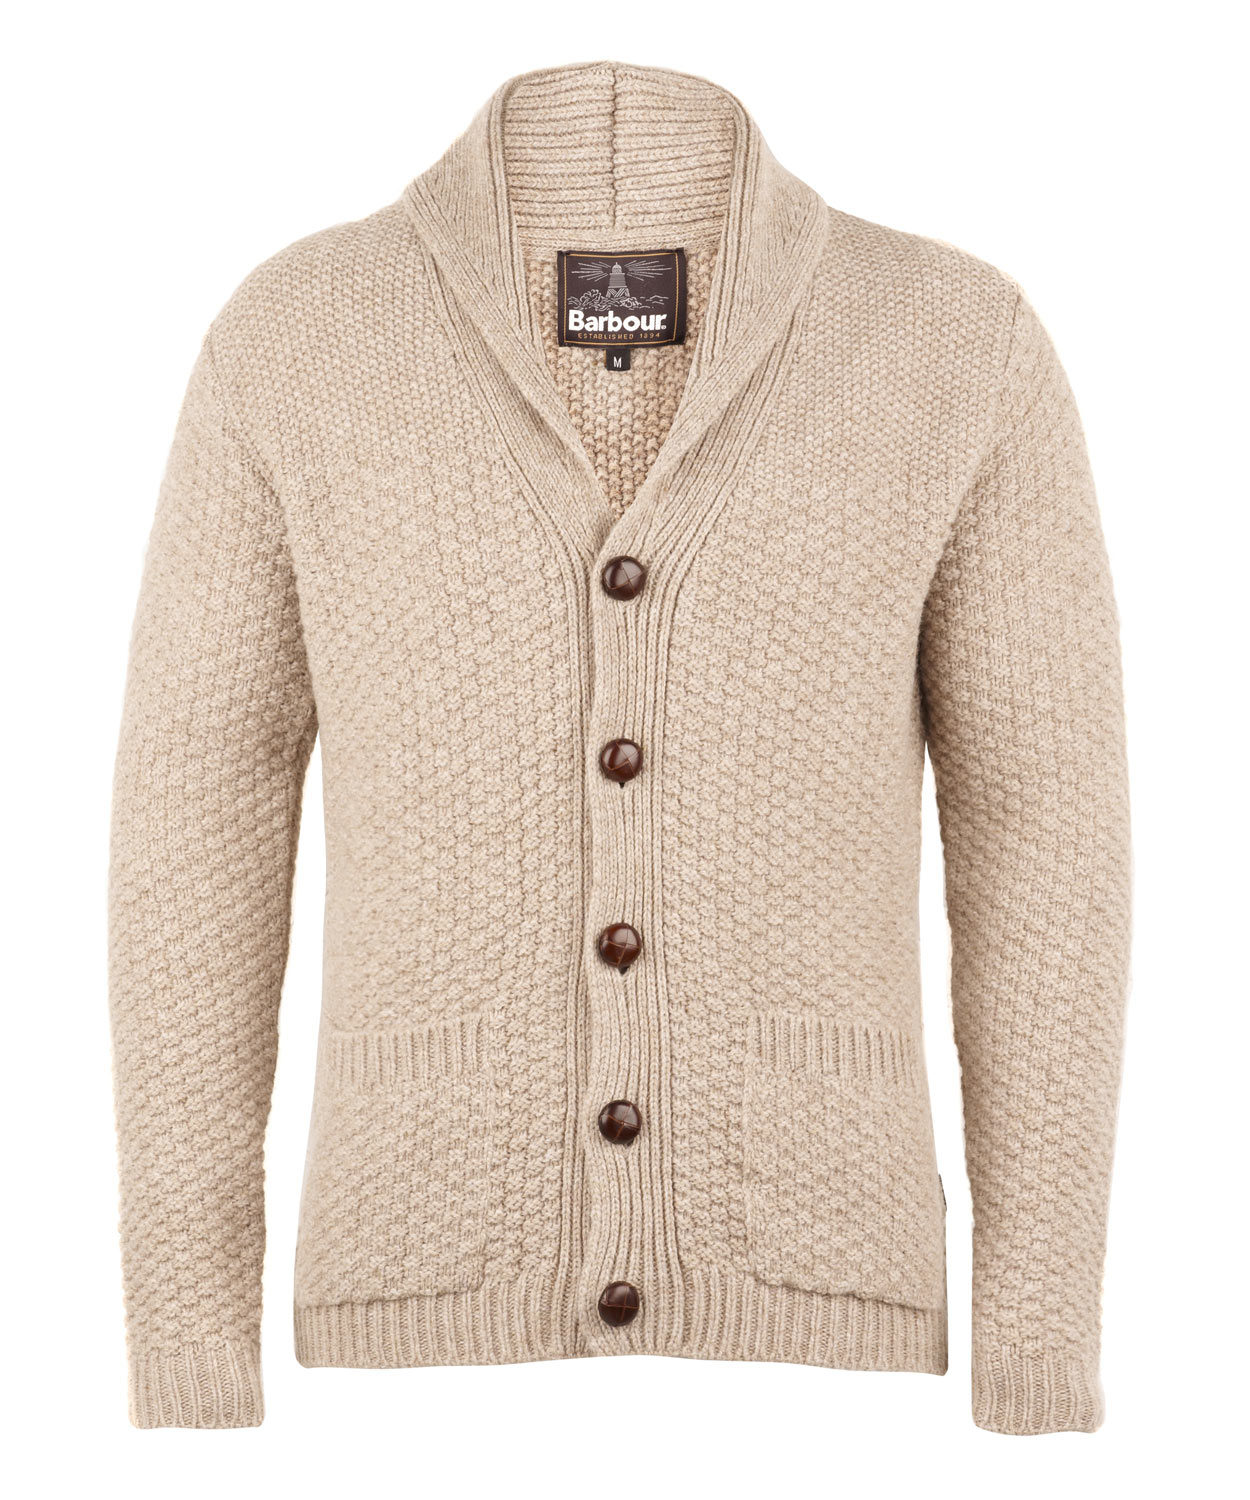 Barbour Oatmeal Moss Shawl Collar Cardigan in Natural for Men - Lyst